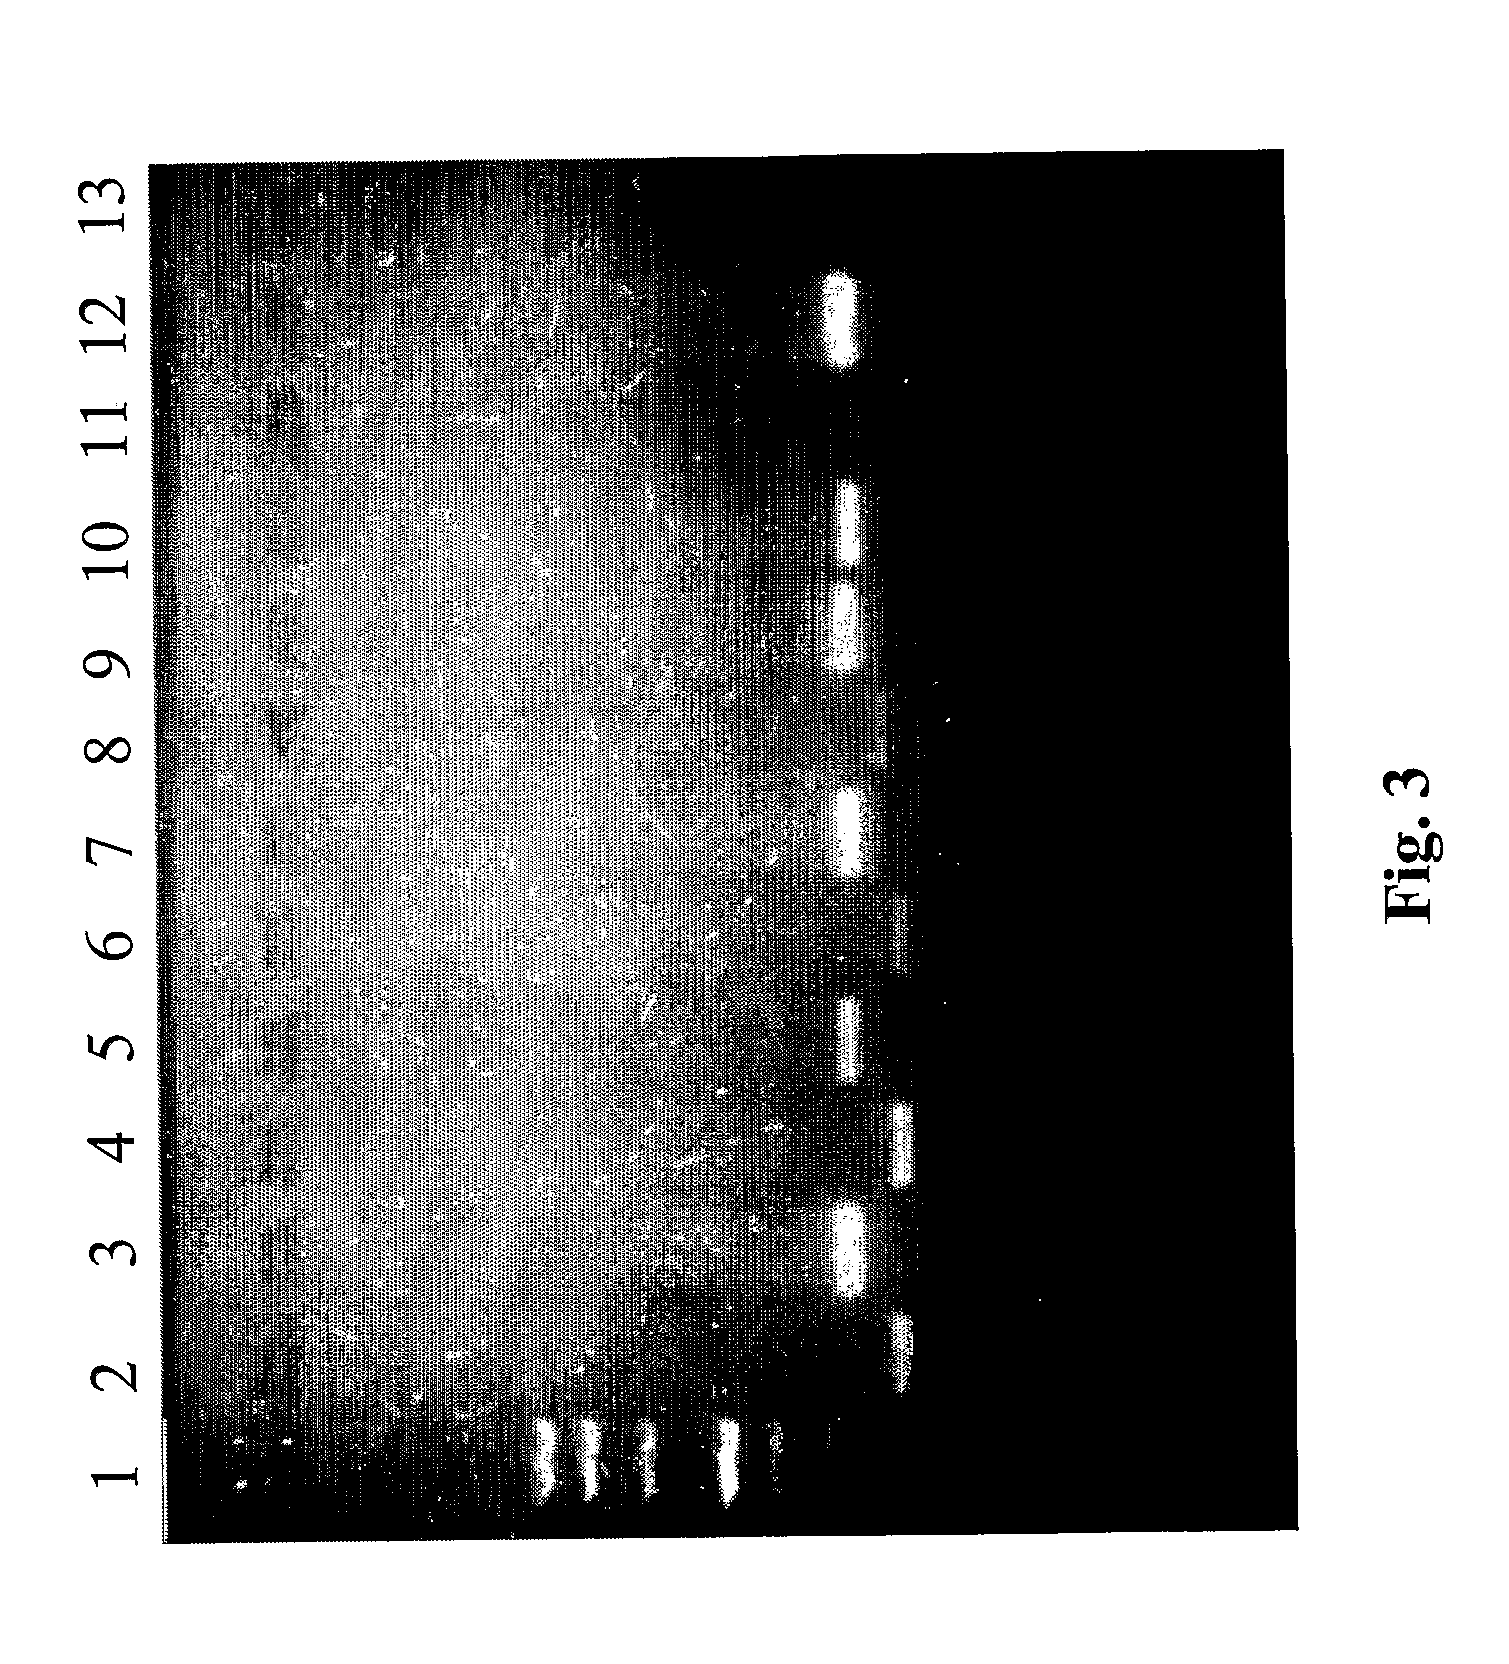 Method for simultaneous extraction of nucleic acids from a biological sample